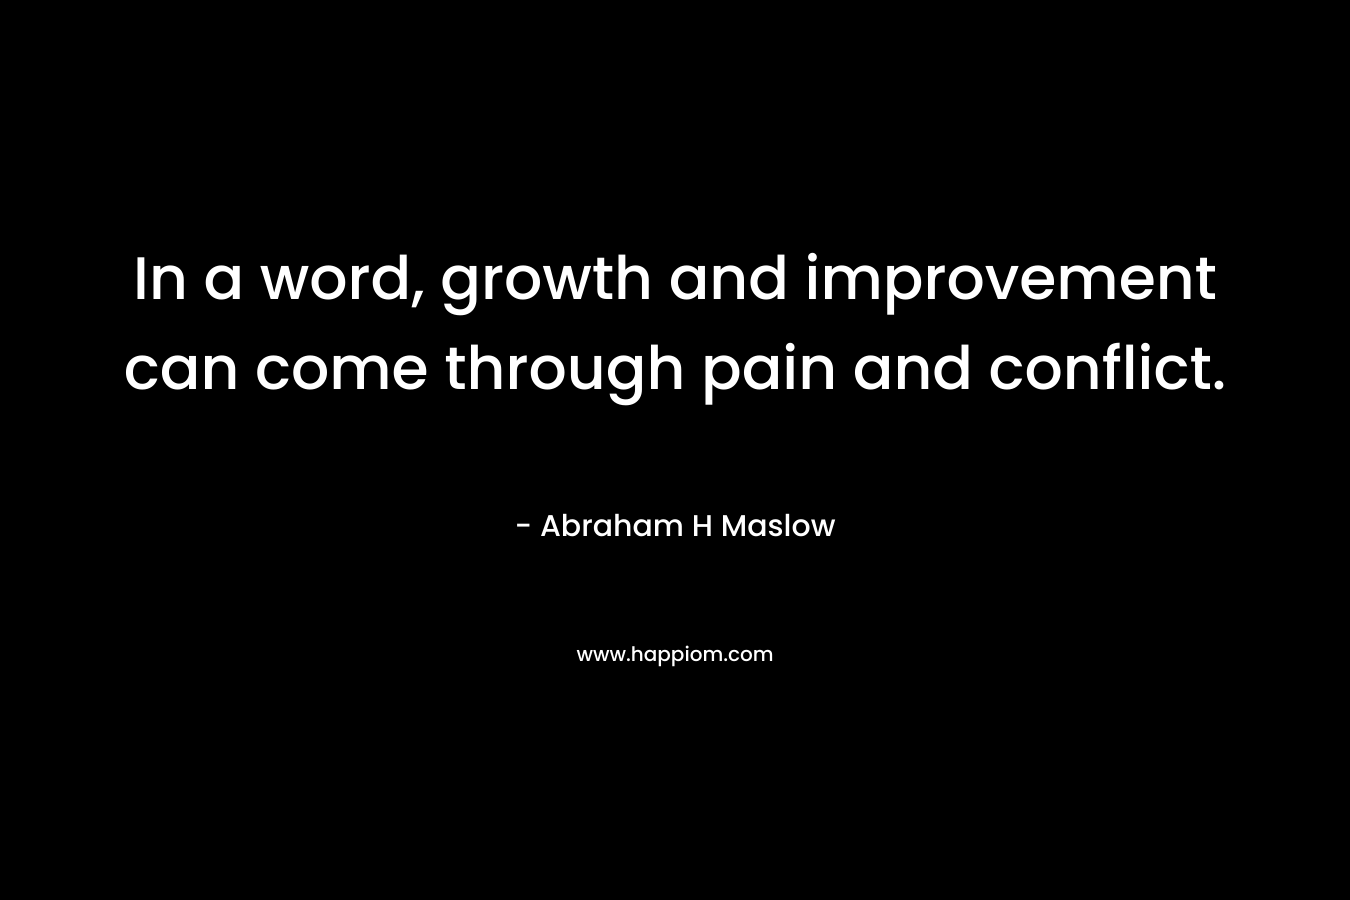 In a word, growth and improvement can come through pain and conflict. – Abraham H Maslow